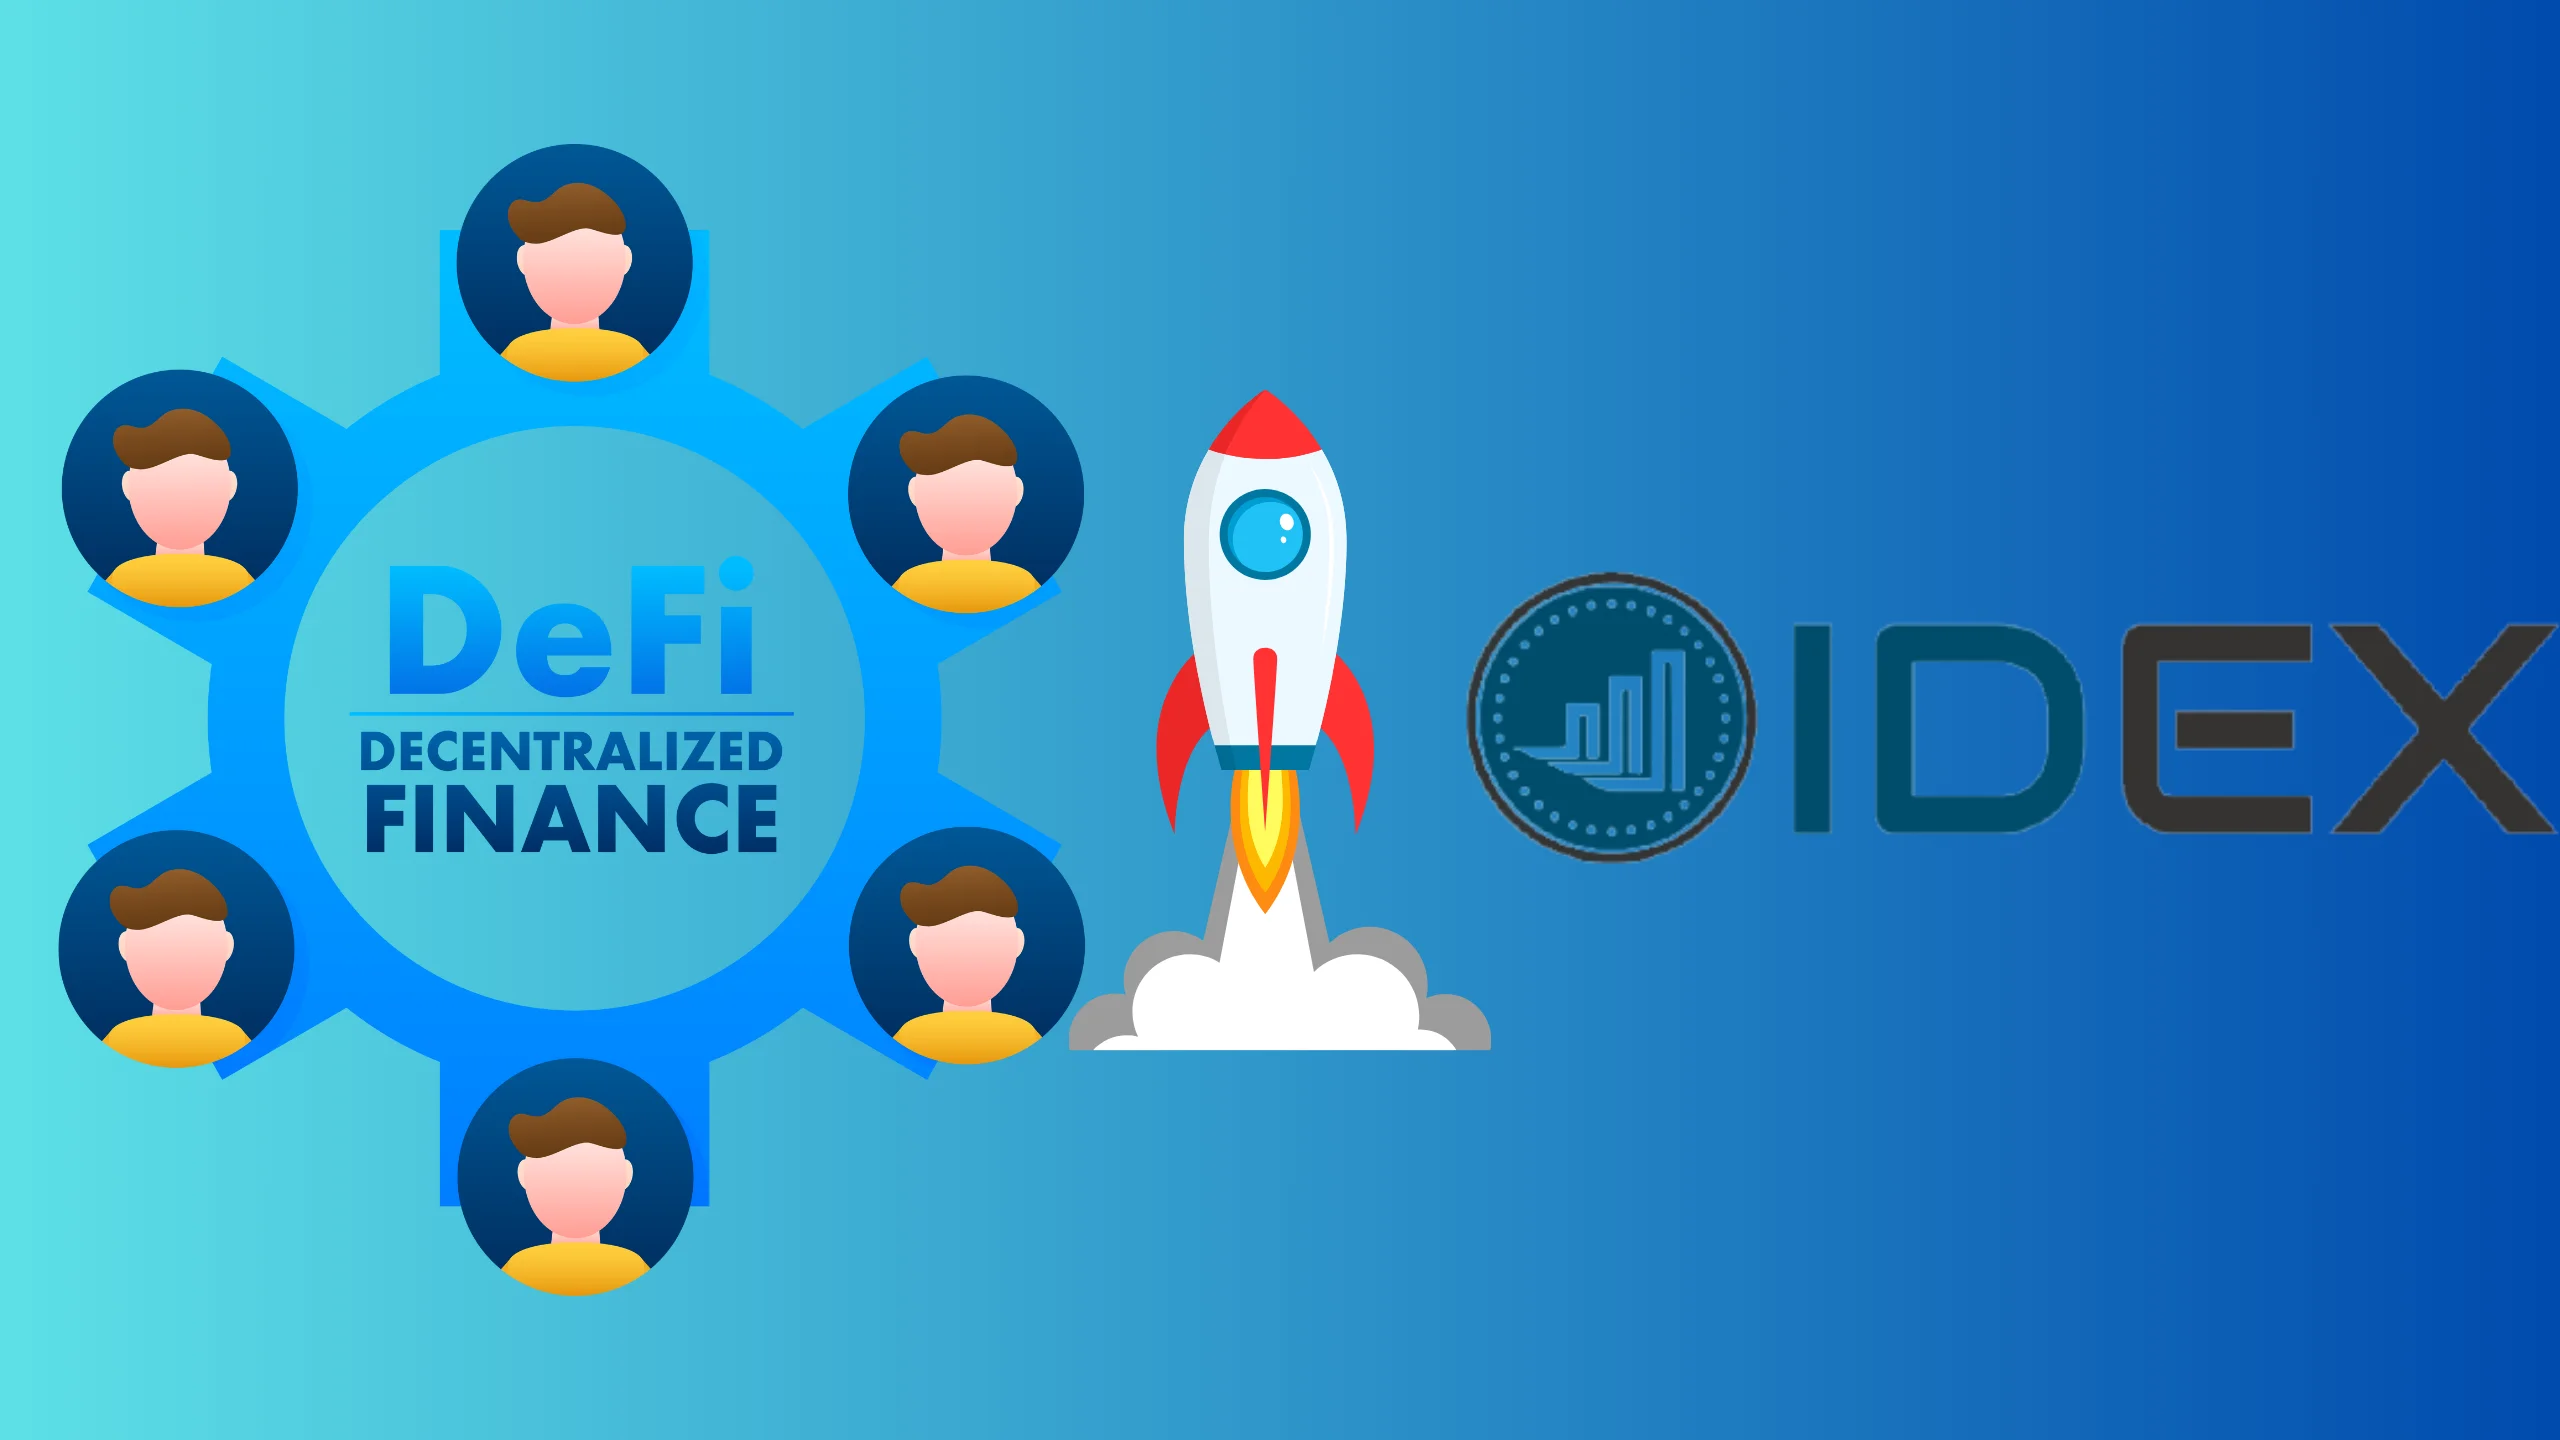 Illustration of a DeFi exchange solution similar to IDEX, highlighting key features like decentralized trading, user interface, and security protocols.